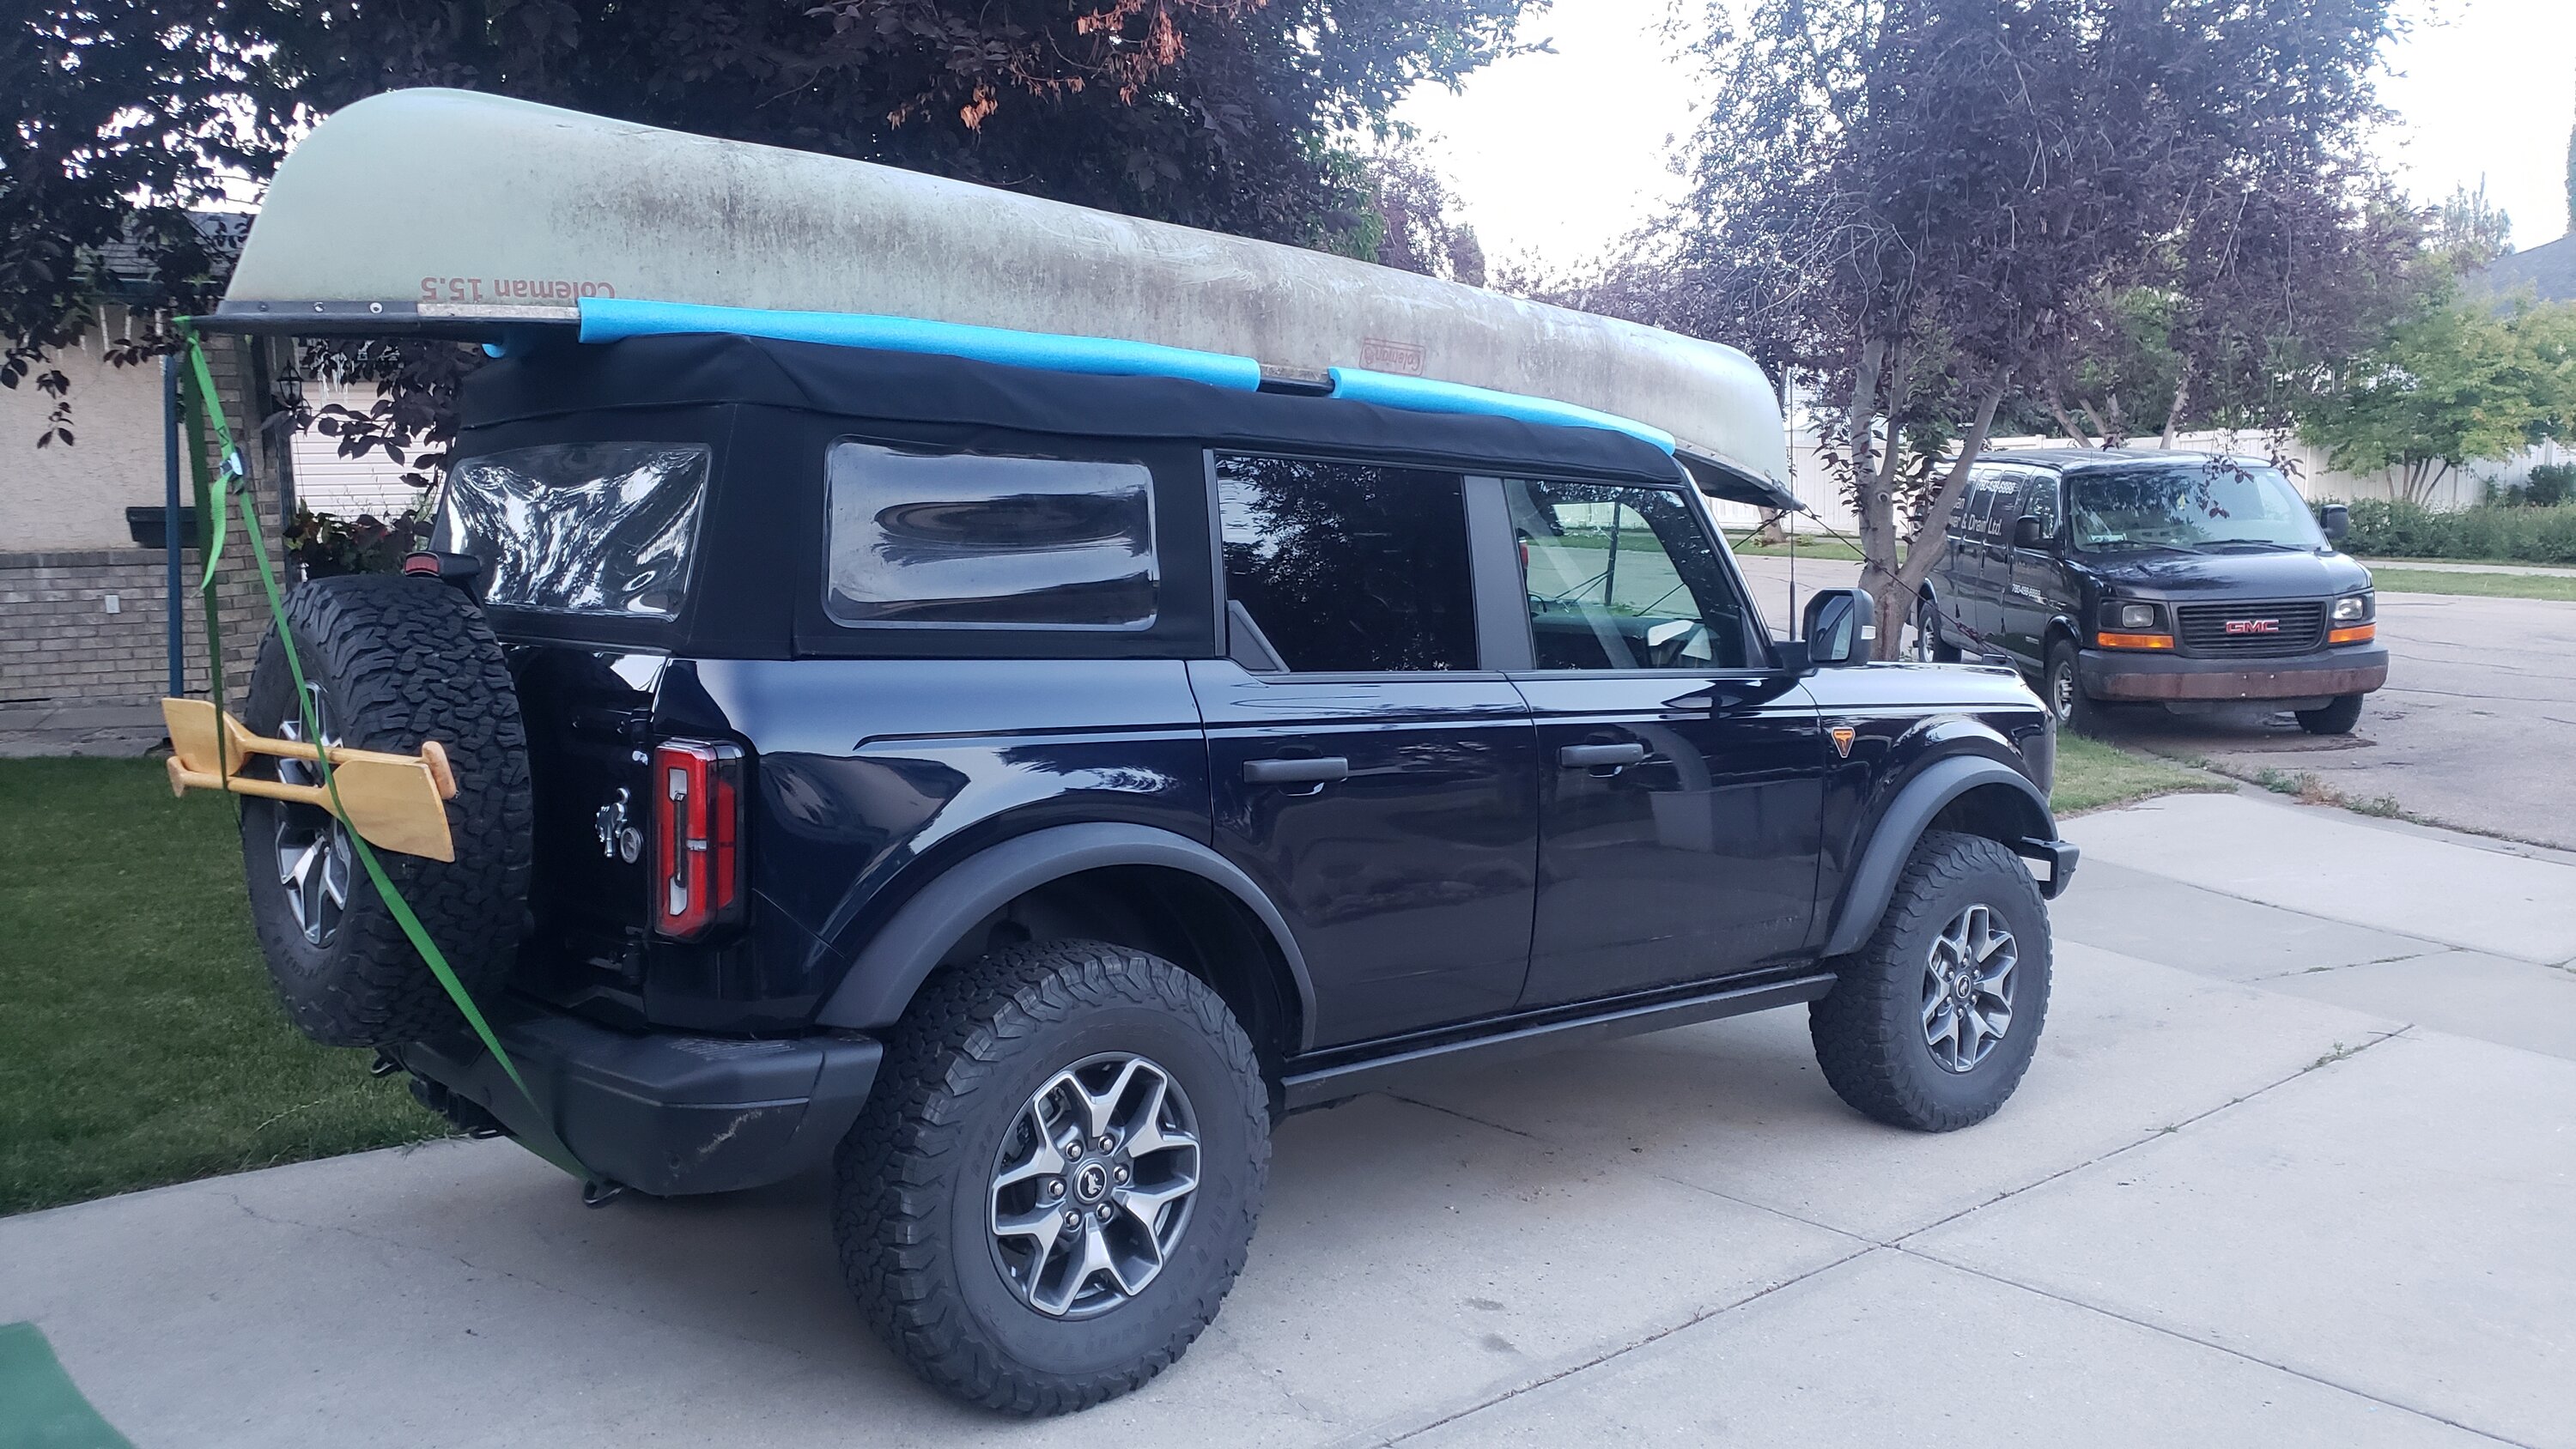 Ford Bronco 2 Door Broncos - What’s on your roof racks? [Photos Thread] 20220802_212656